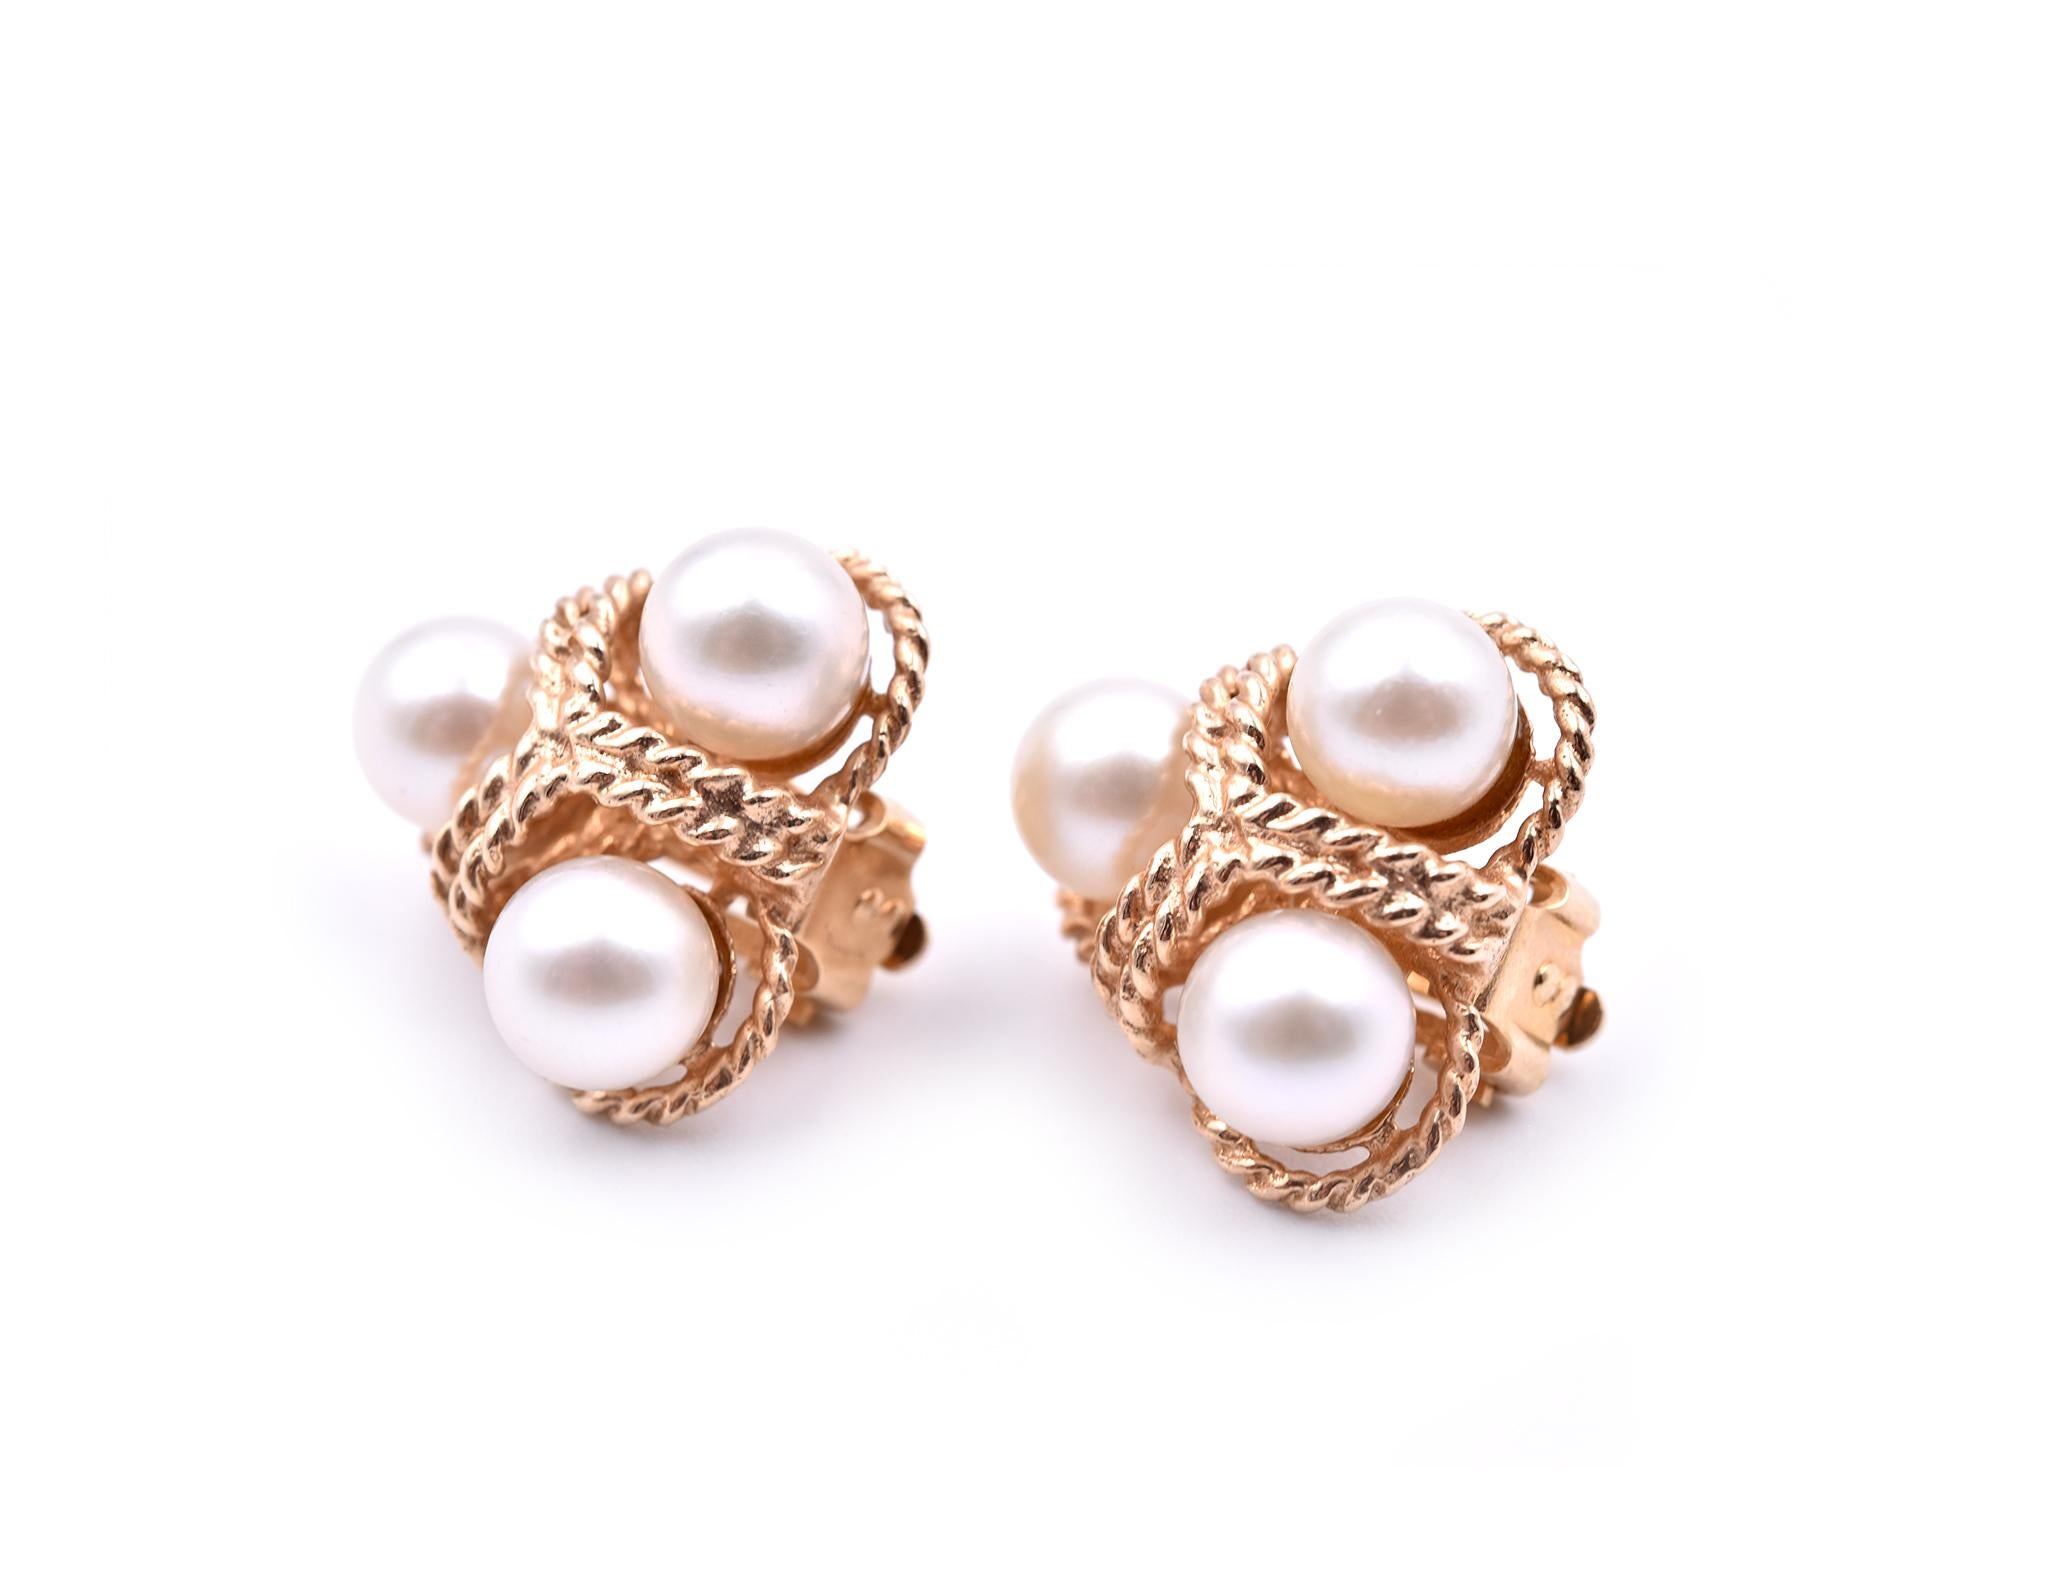 Designer: custom design
Material: 14k yellow gold
Pearls: cultured Akoya pearls
Fastening: clip-on
Dimensions: Earrings measure approximately 15.95mm x 17.15mm
Weight: 7.14 grams	
